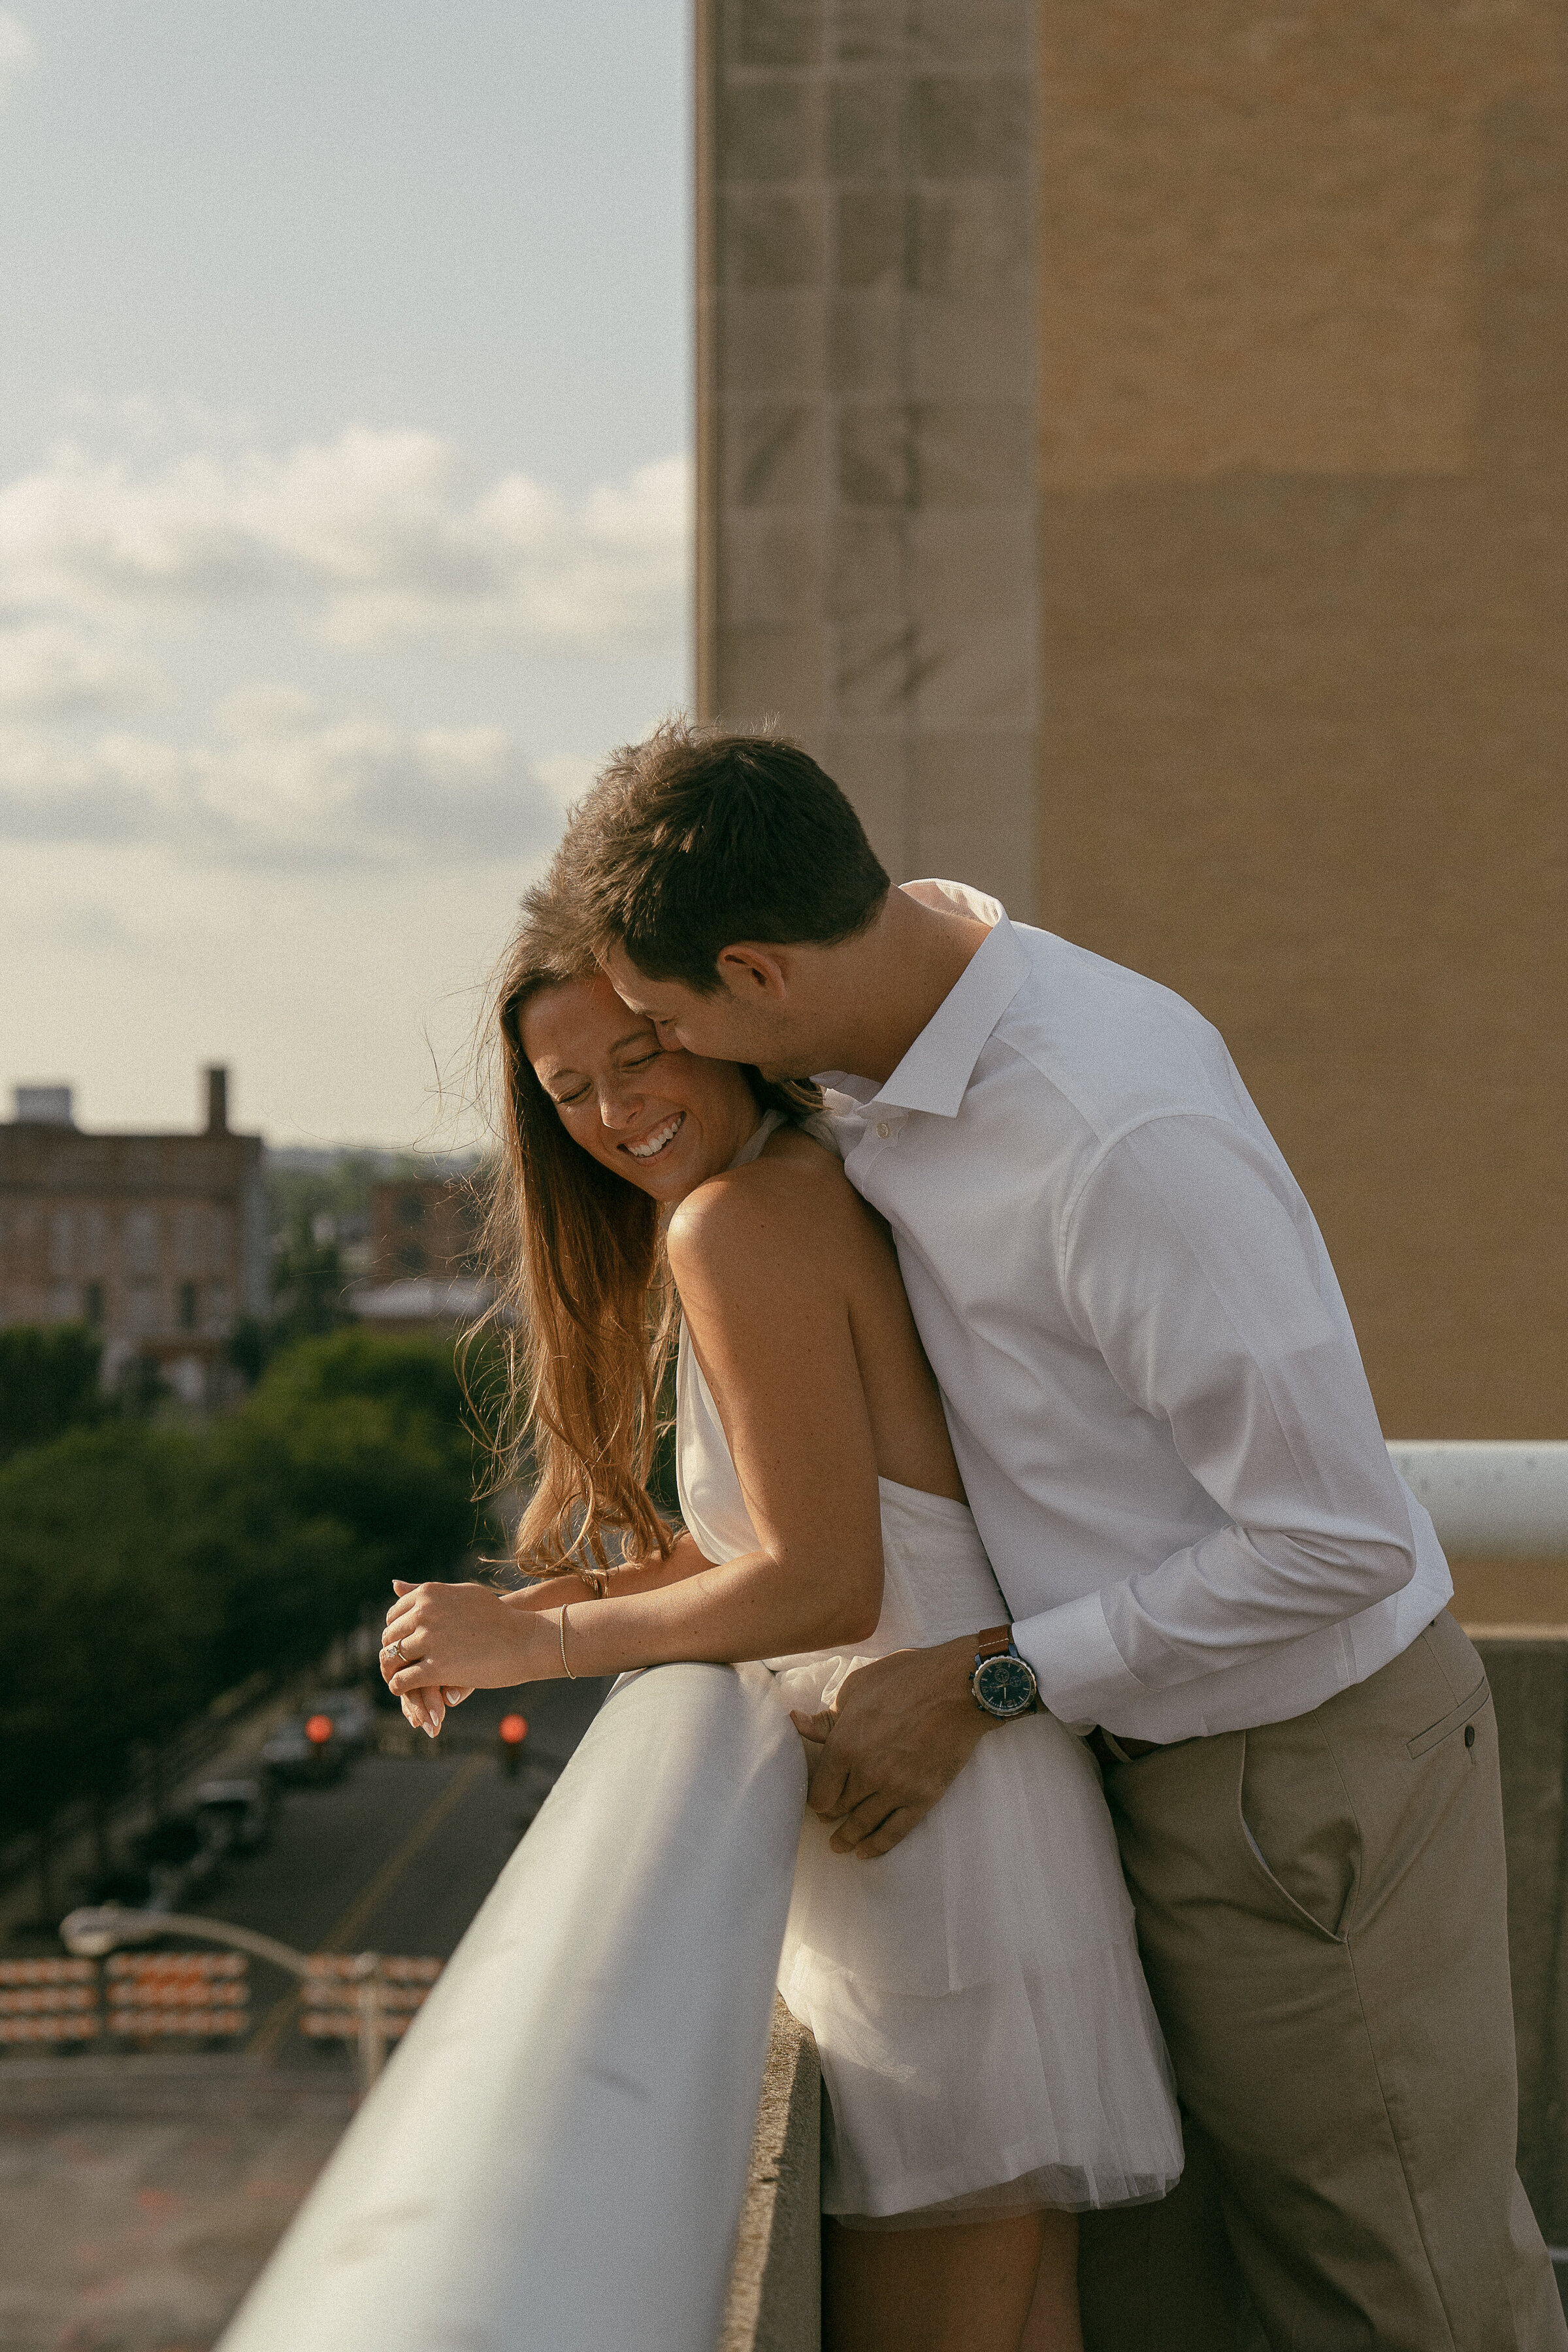 Embracing couple kisses on a rooftop.